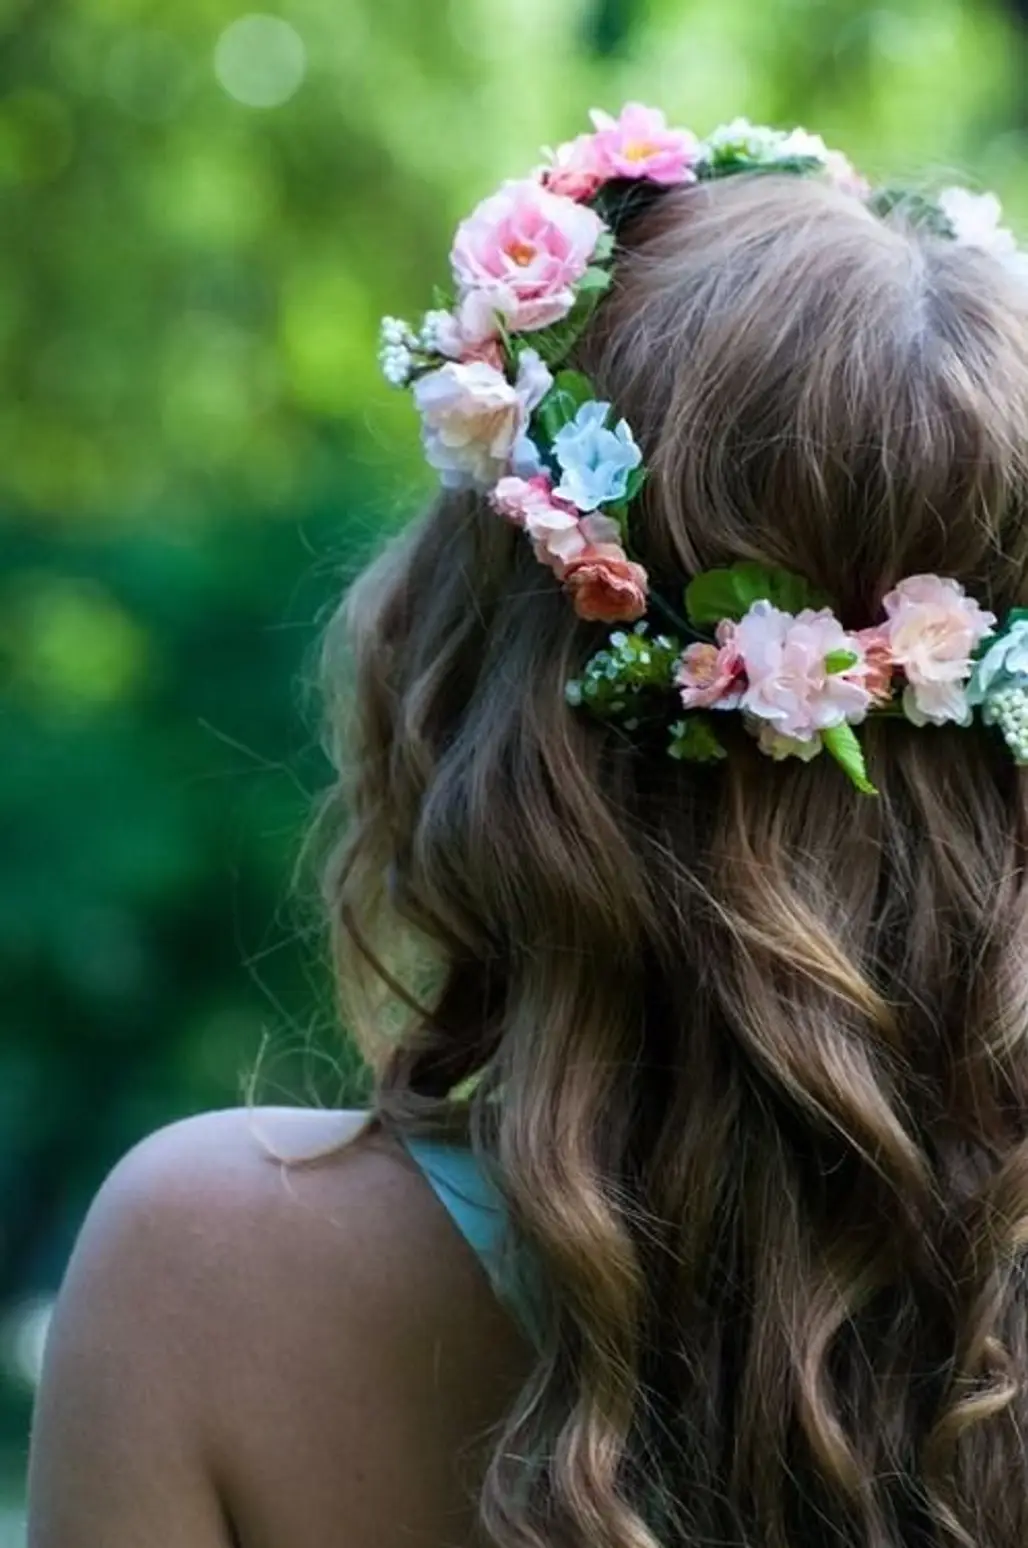 Girly Pink is Perfect for Any Flower Crown